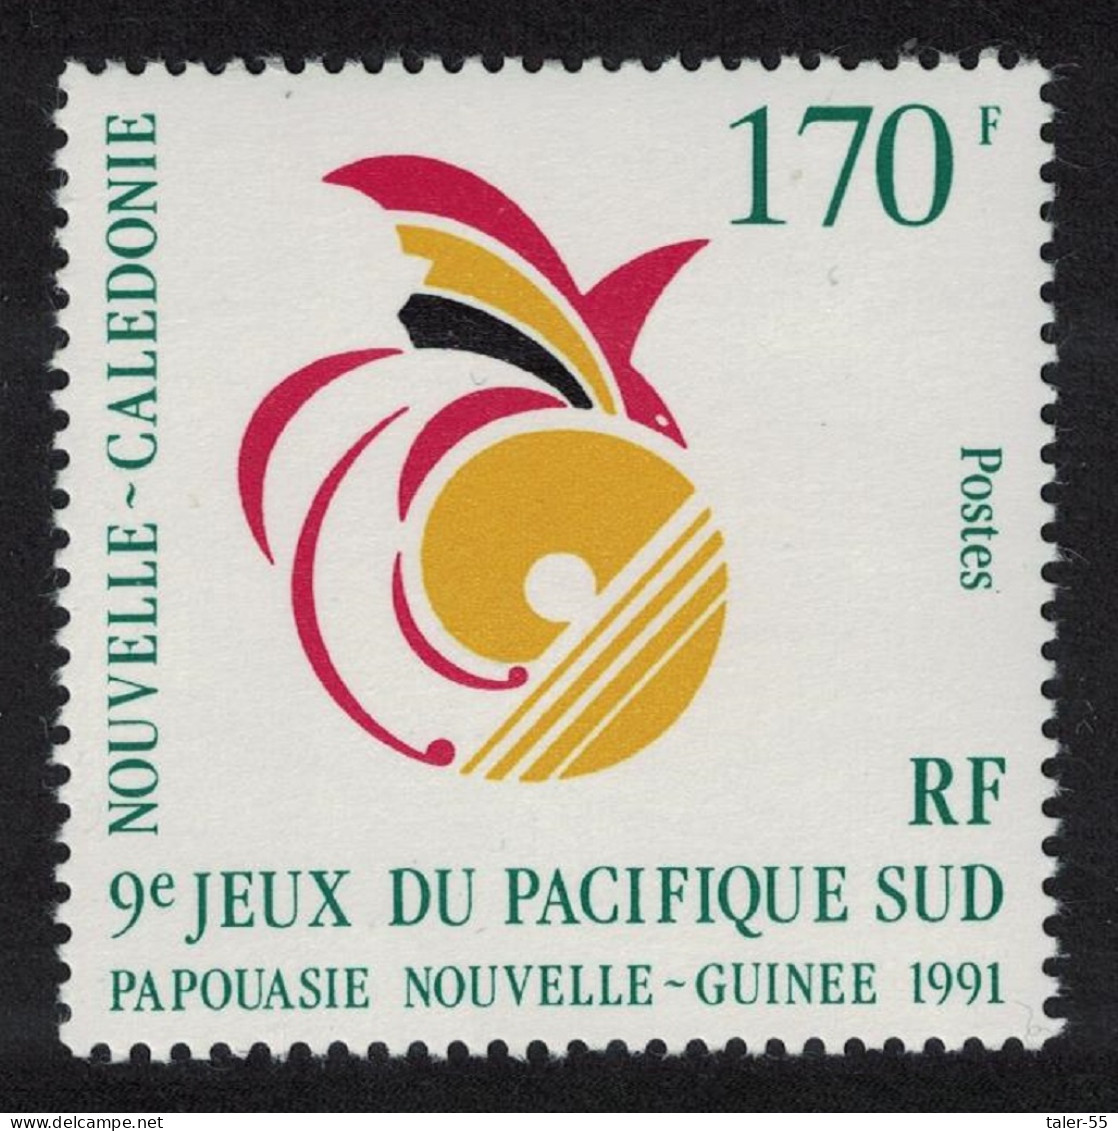 New Caledonia Ninth South Pacific Games Papua New Guinea 1991 MNH SG#922 - Neufs